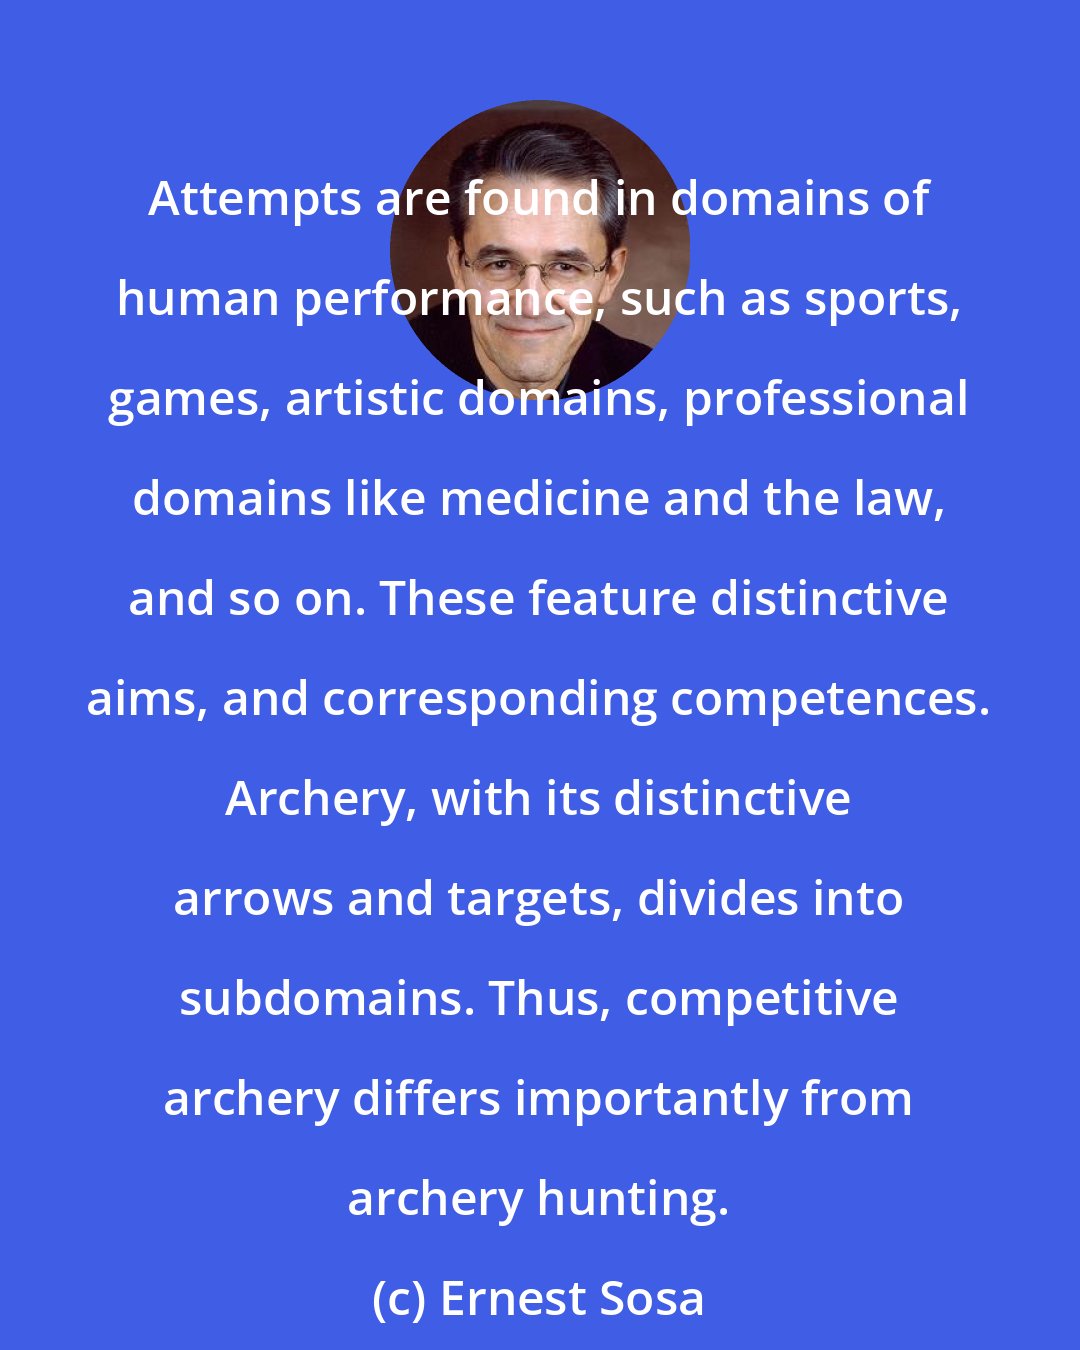 Ernest Sosa: Attempts are found in domains of human performance, such as sports, games, artistic domains, professional domains like medicine and the law, and so on. These feature distinctive aims, and corresponding competences. Archery, with its distinctive arrows and targets, divides into subdomains. Thus, competitive archery differs importantly from archery hunting.